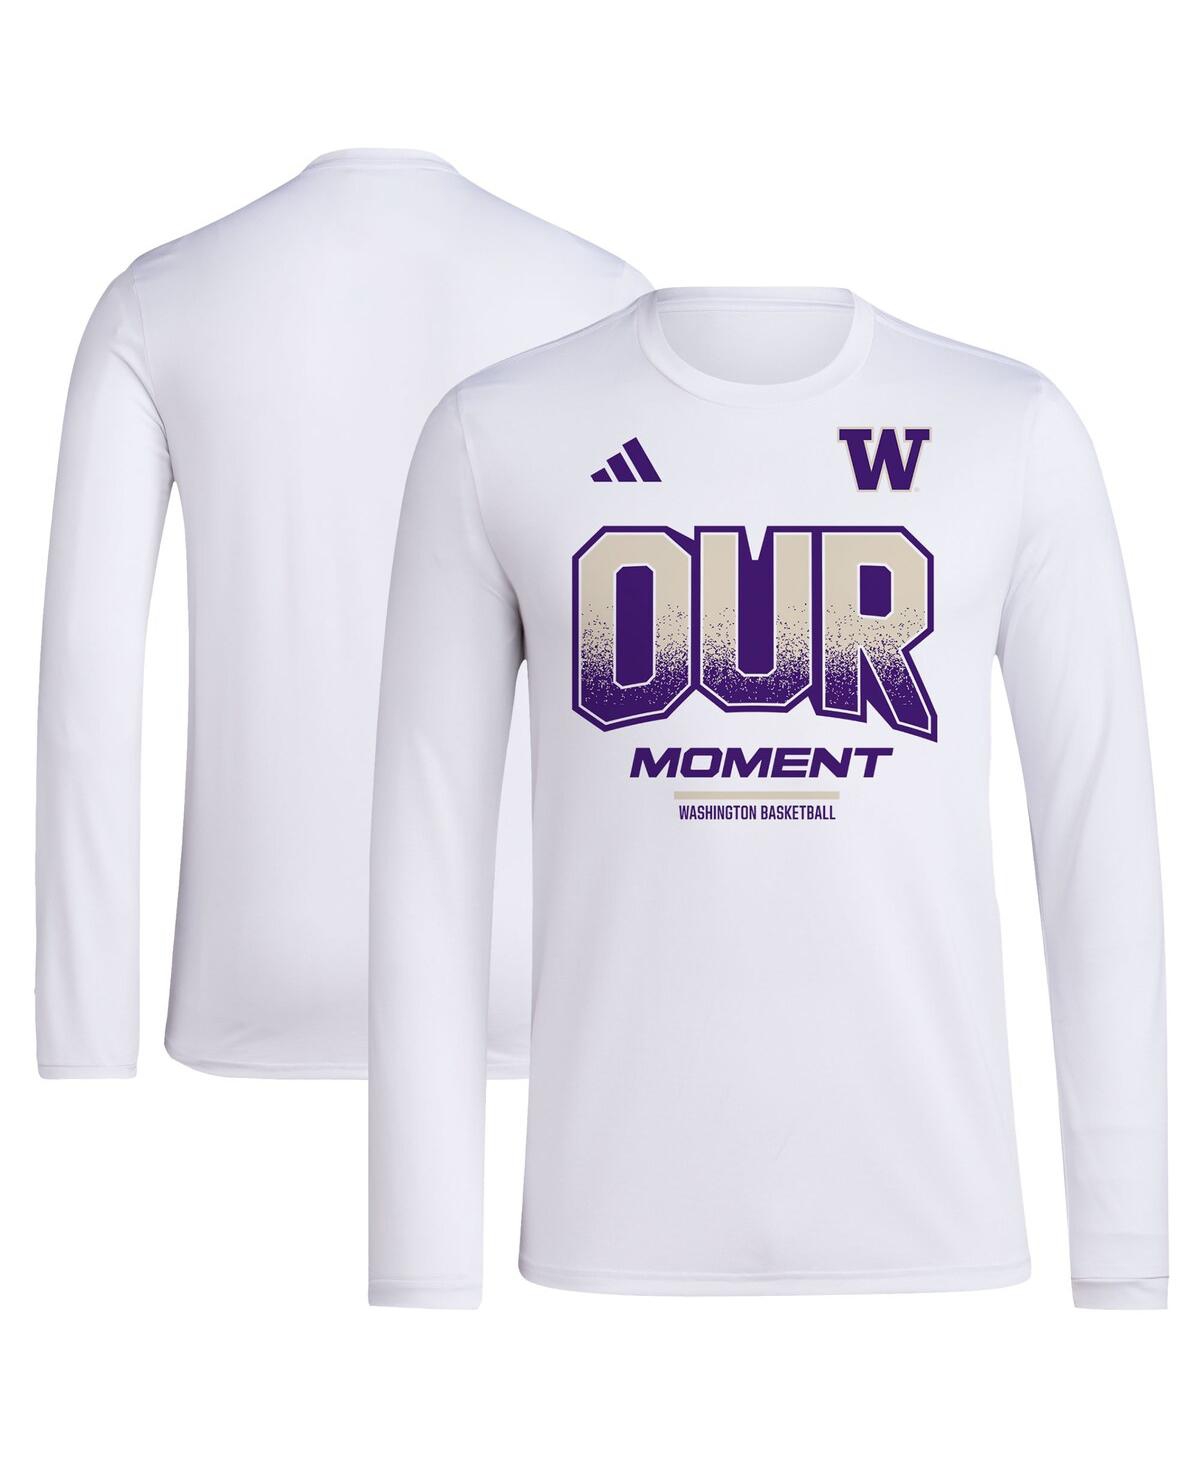 Men's and Women's adidas White Washington Huskies 2024 On-Court Bench Our Moment Long Sleeve T-shirt - White